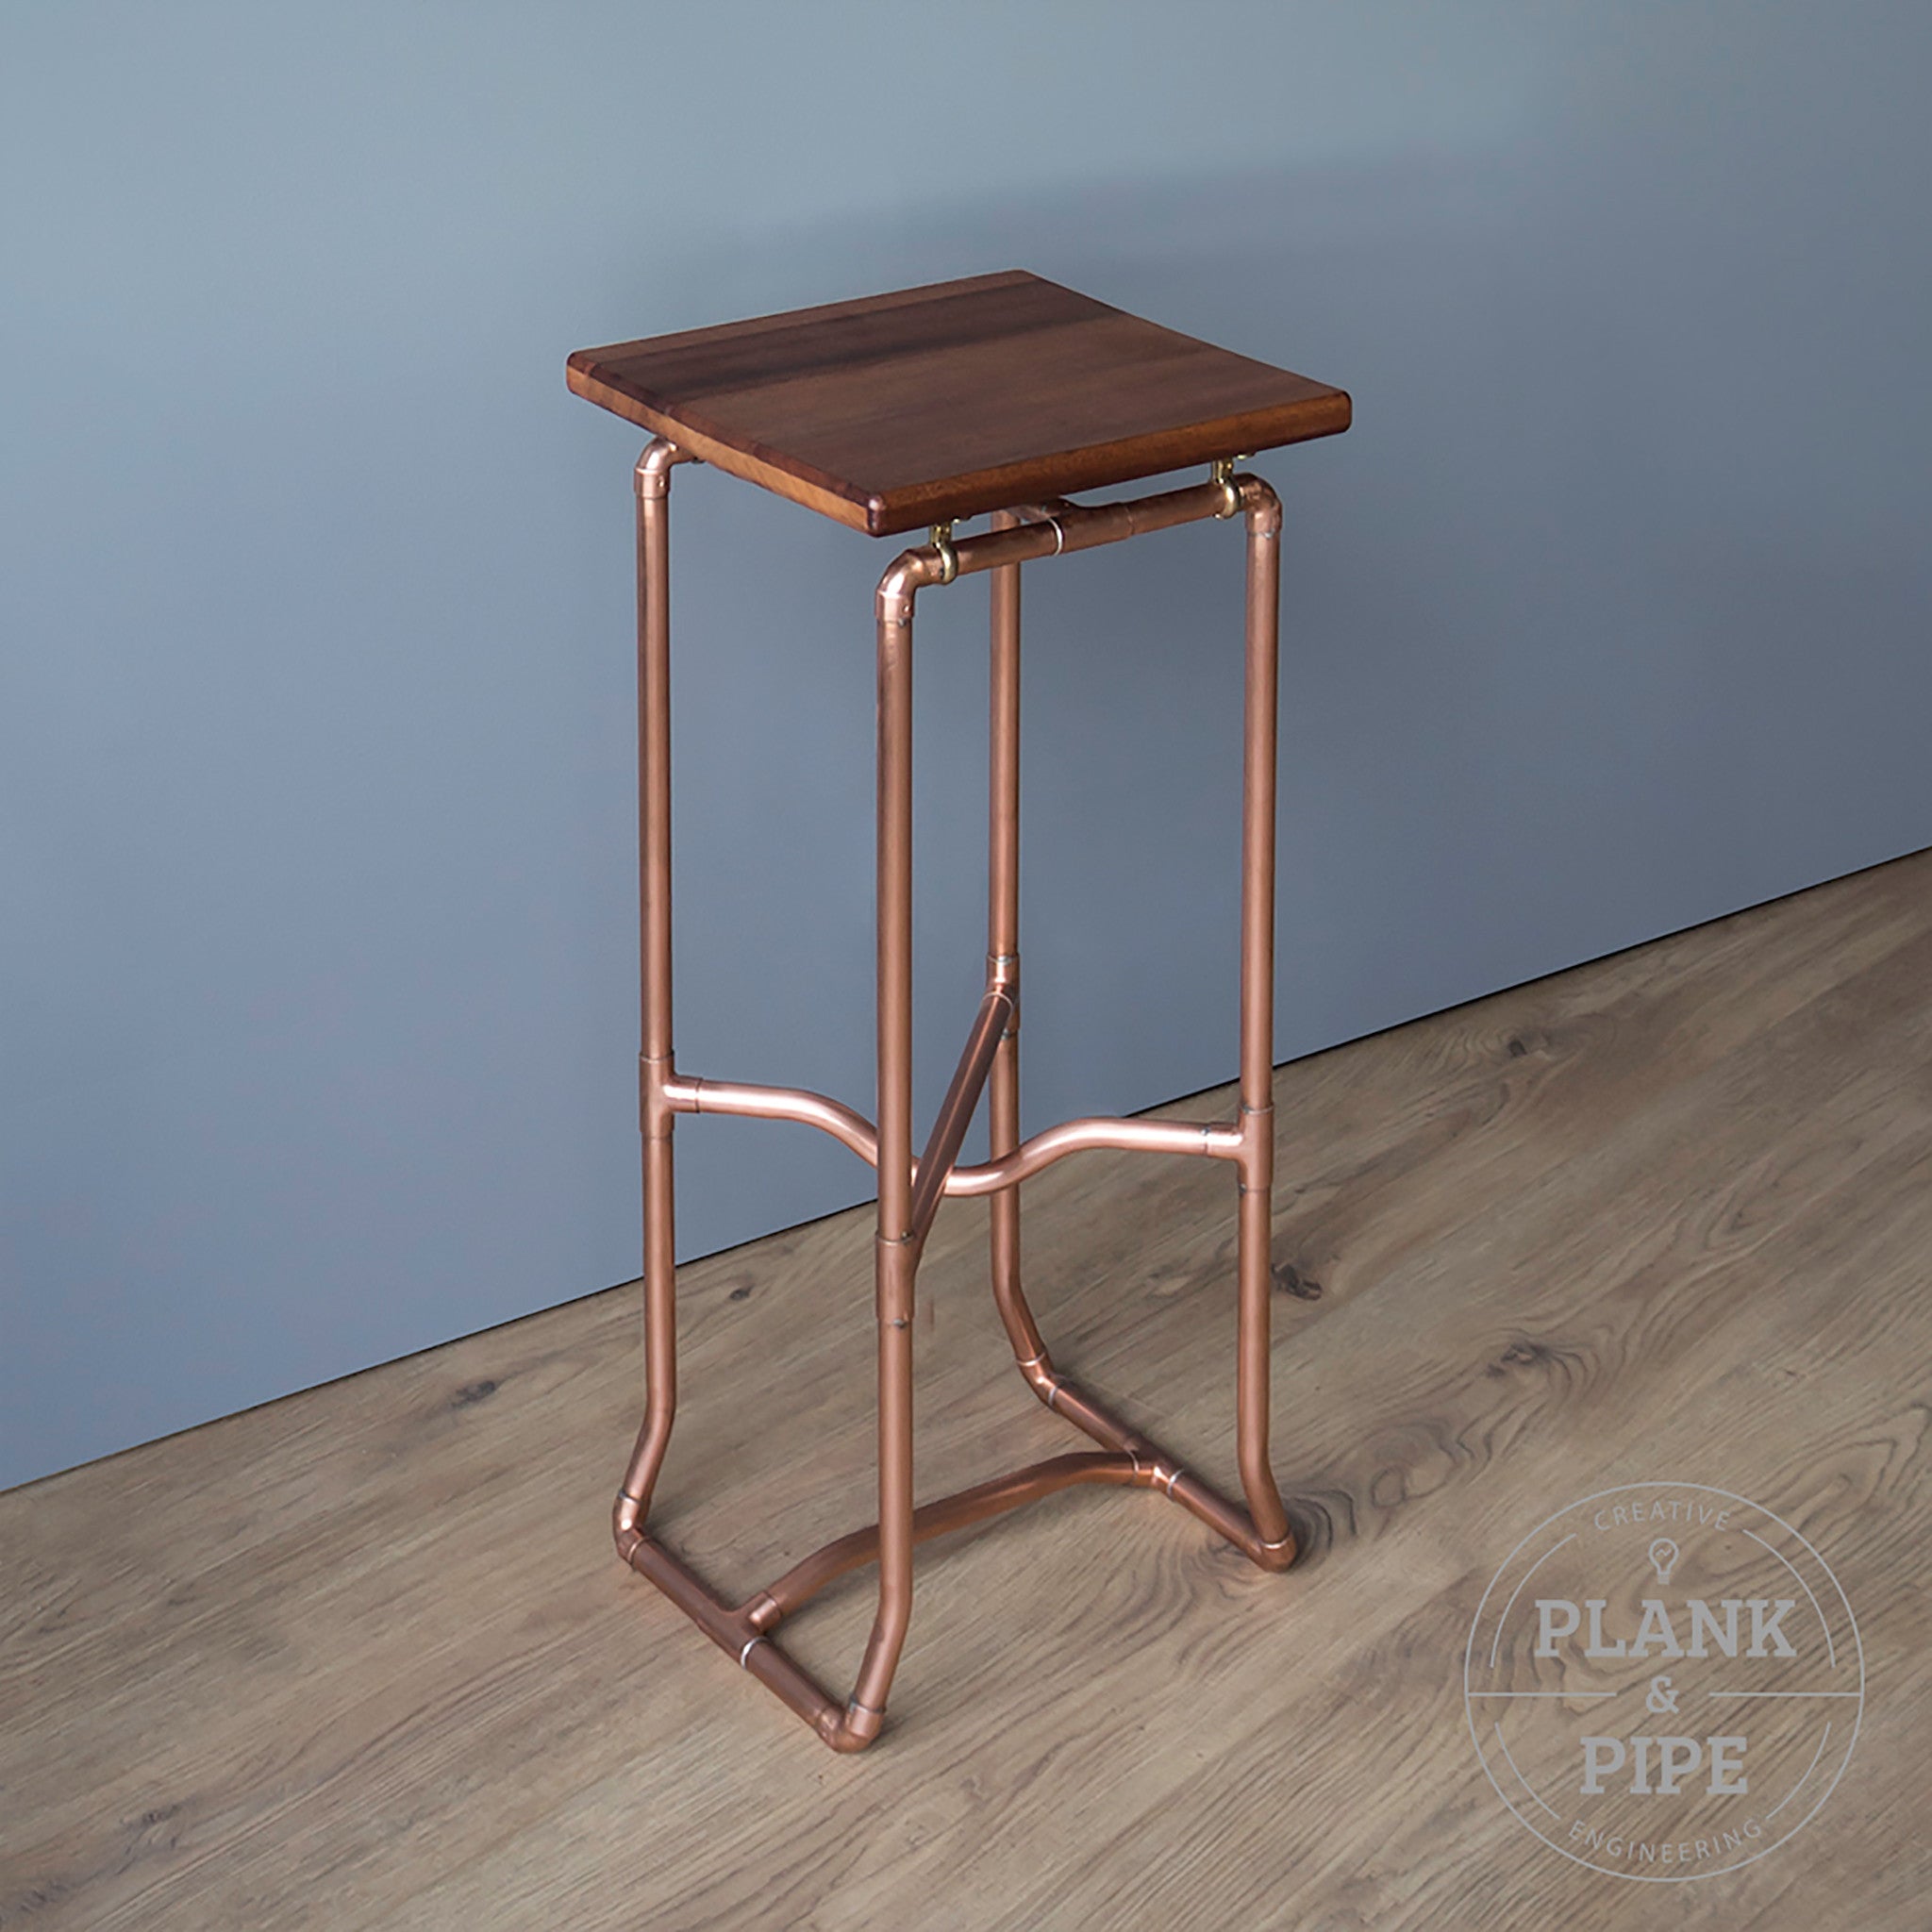 Copper Pipe Botanical Plant Stand Small